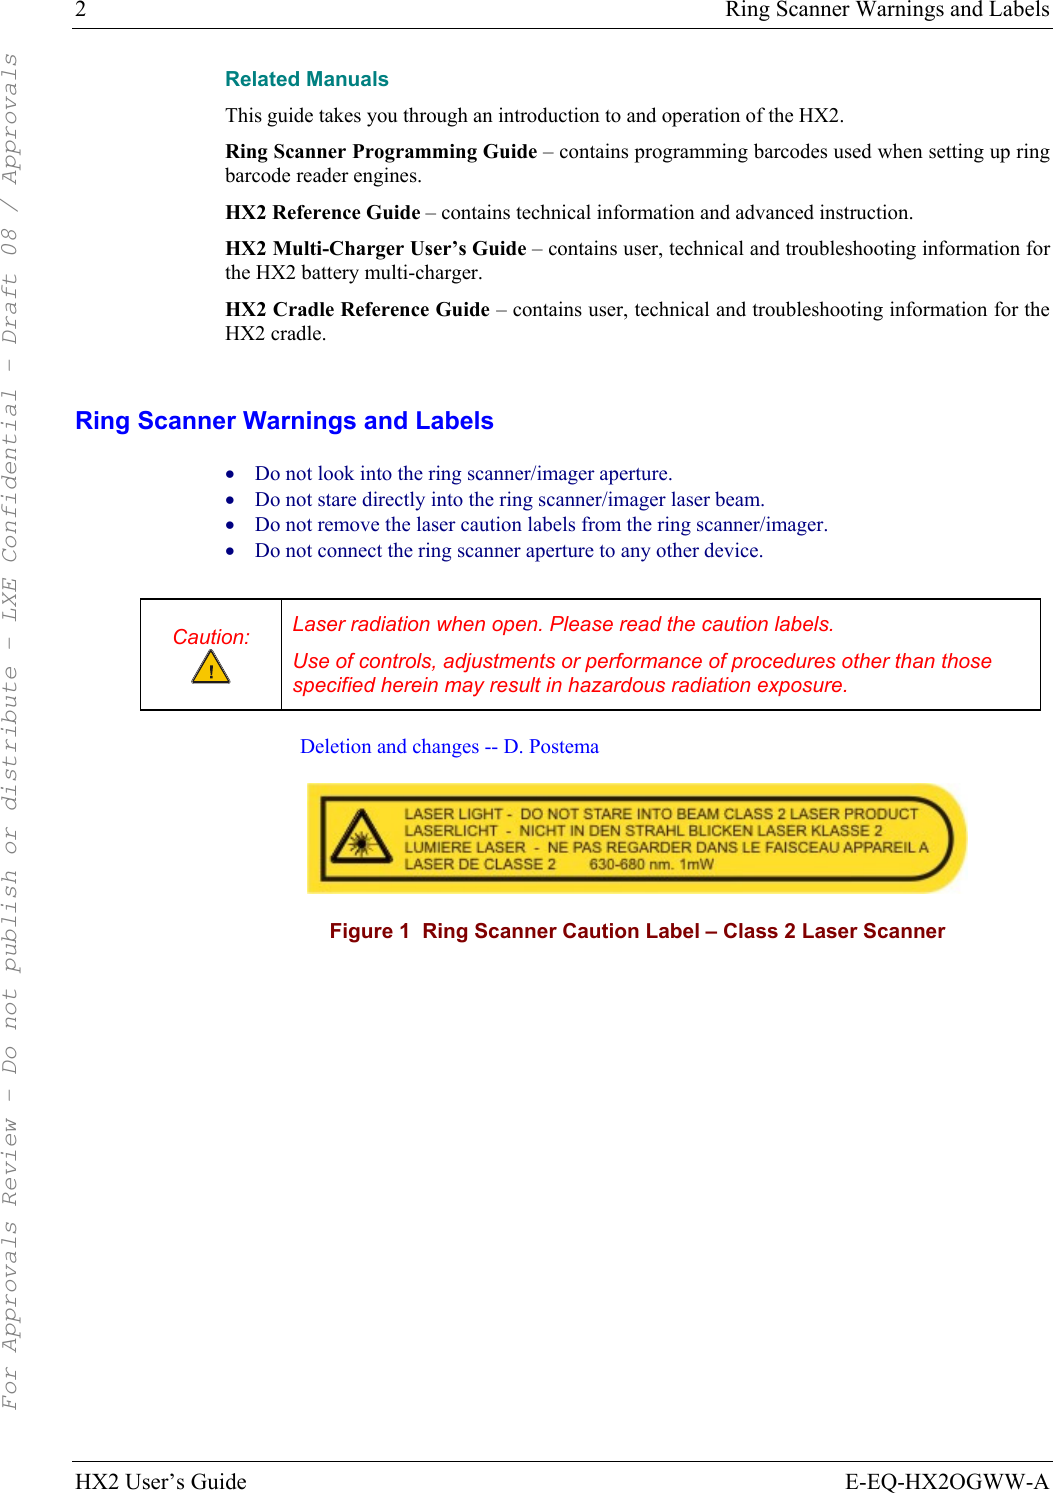 2  Ring Scanner Warnings and Labels HX2 User’s Guide  E-EQ-HX2OGWW-A Related Manuals This guide takes you through an introduction to and operation of the HX2.  Ring Scanner Programming Guide – contains programming barcodes used when setting up ring barcode reader engines. HX2 Reference Guide – contains technical information and advanced instruction. HX2 Multi-Charger User’s Guide – contains user, technical and troubleshooting information for the HX2 battery multi-charger. HX2 Cradle Reference Guide – contains user, technical and troubleshooting information for the HX2 cradle.  Ring Scanner Warnings and Labels • Do not look into the ring scanner/imager aperture. • Do not stare directly into the ring scanner/imager laser beam.  • Do not remove the laser caution labels from the ring scanner/imager.  • Do not connect the ring scanner aperture to any other device.  Caution:  Laser radiation when open. Please read the caution labels. Use of controls, adjustments or performance of procedures other than those specified herein may result in hazardous radiation exposure.  Deletion and changes -- D. Postema  Figure 1  Ring Scanner Caution Label – Class 2 Laser Scanner   For Approvals Review - Do not publish or distribute - LXE Confidential - Draft 08 / Approvals